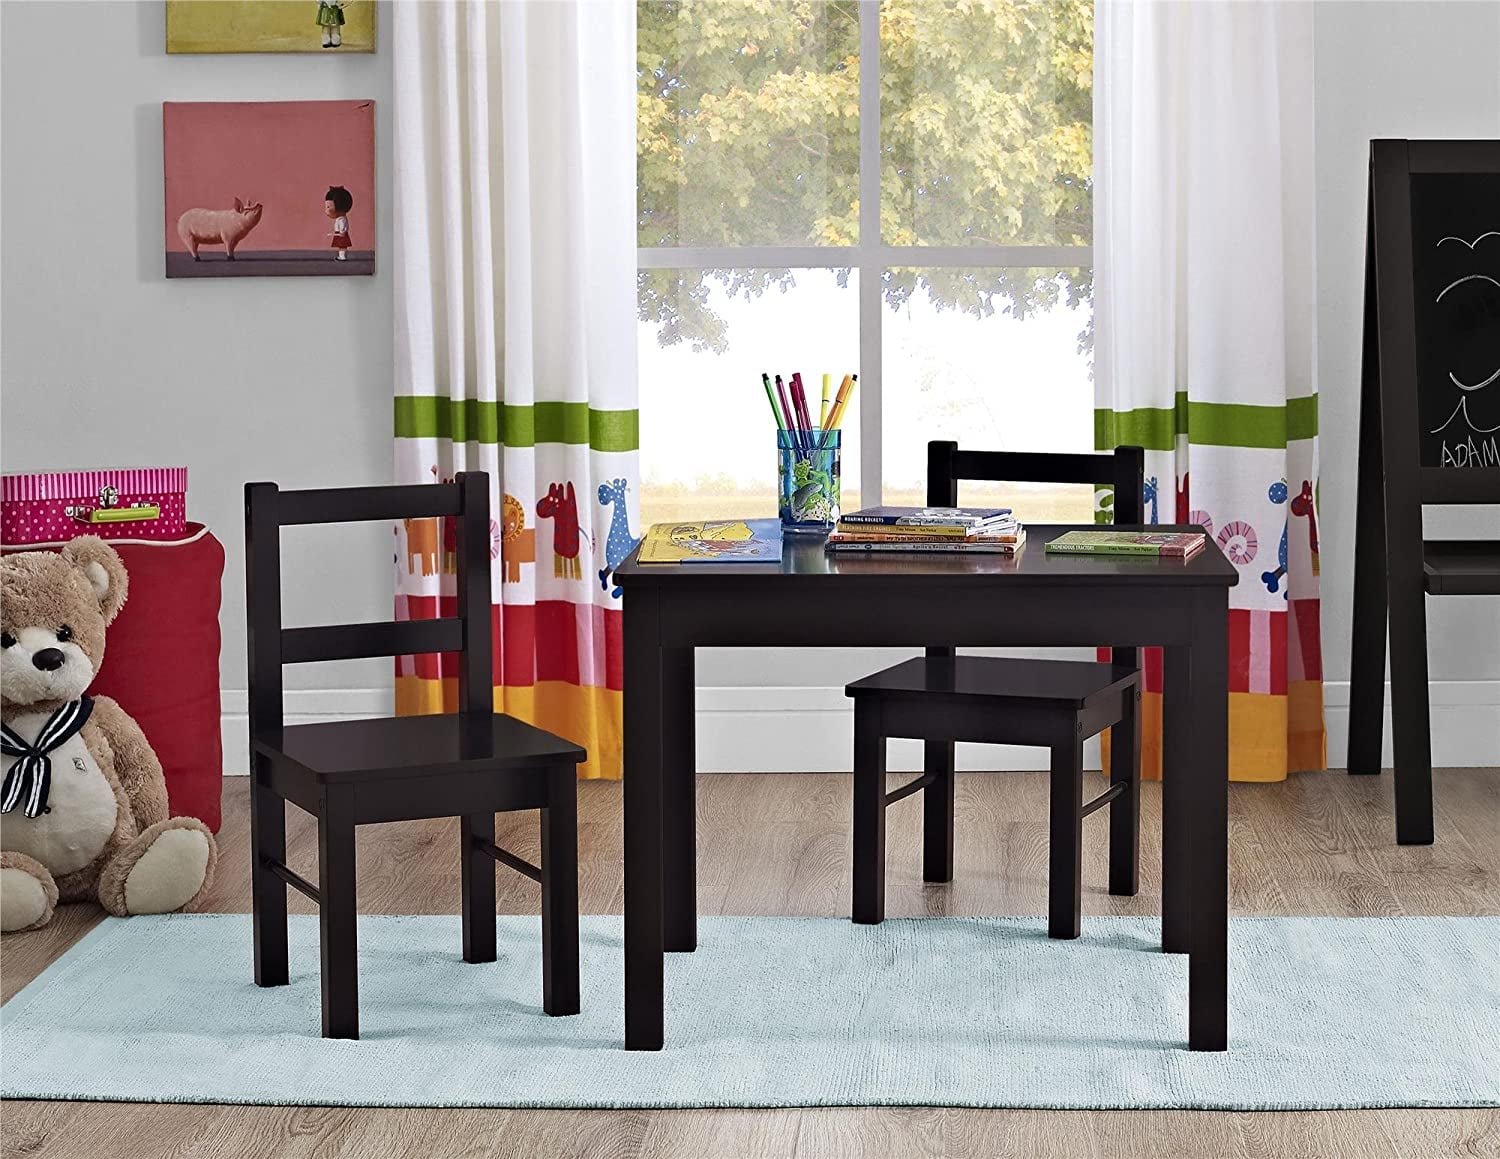 Kids Table And Chair Designs For Your Home